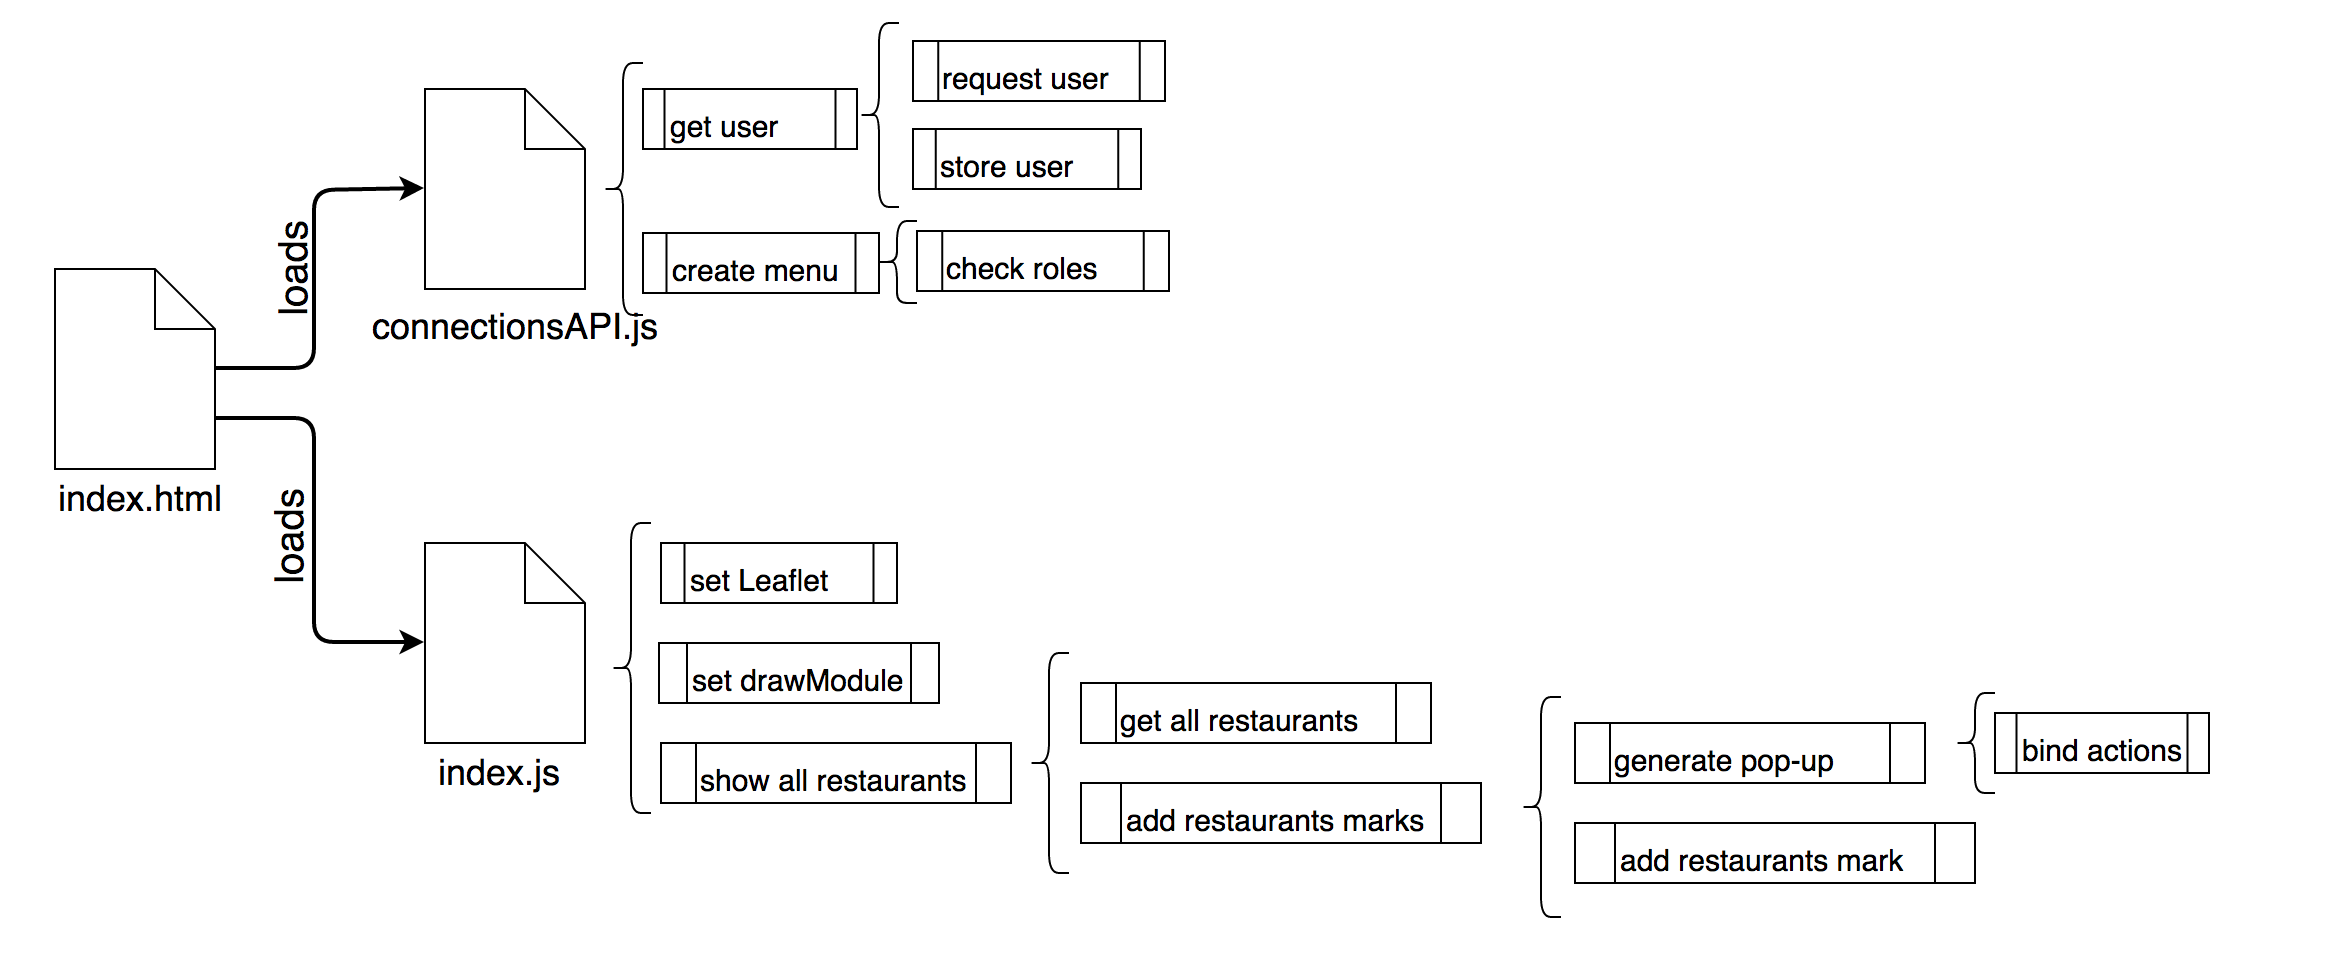 PROCESS INVOLVED IN DRAW RESTAURANTS